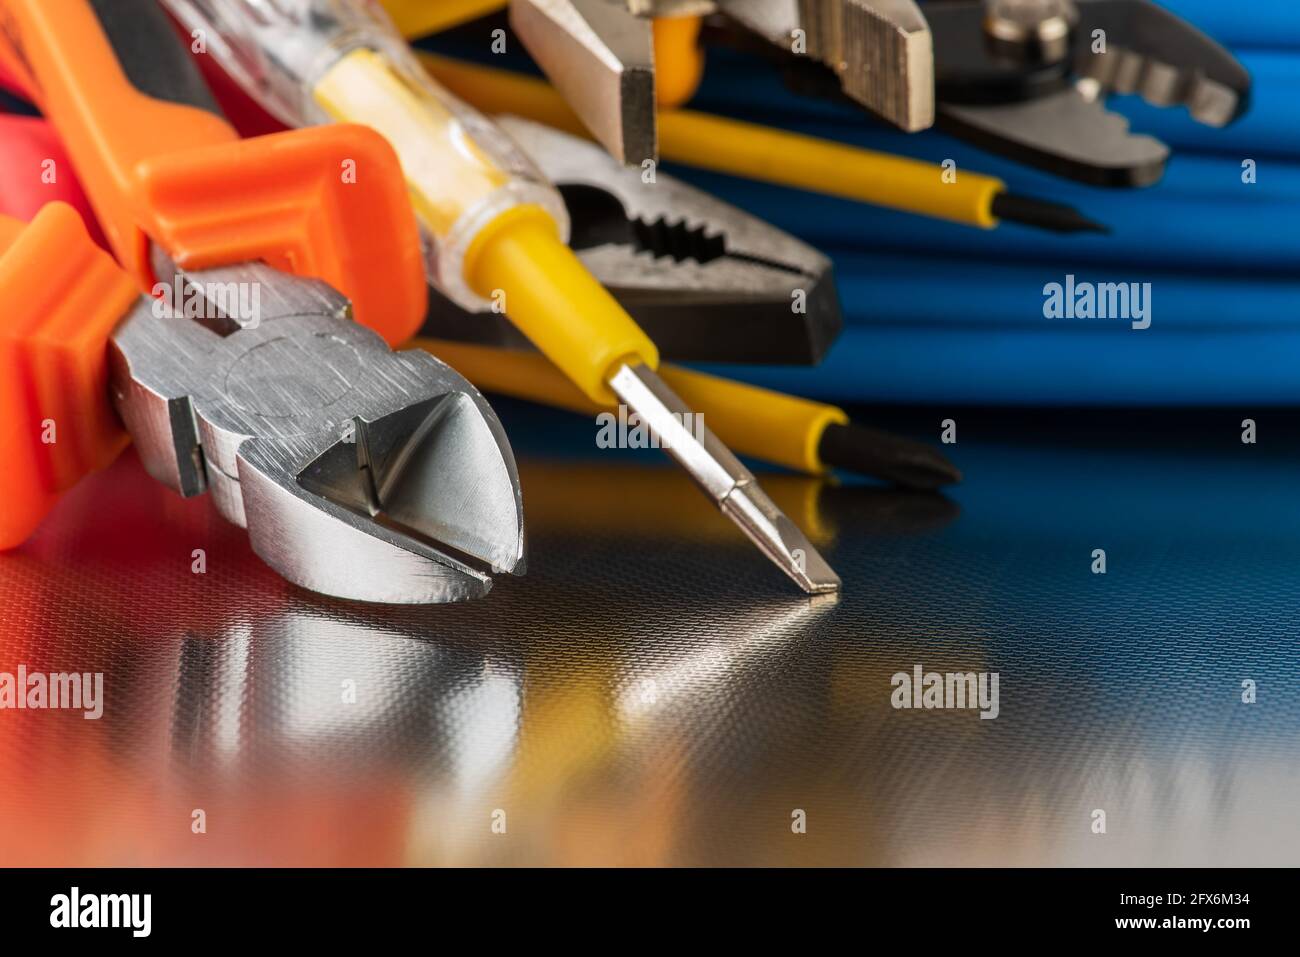 Electrical installation tool and cabling close-up shiny workshop background Stock Photo